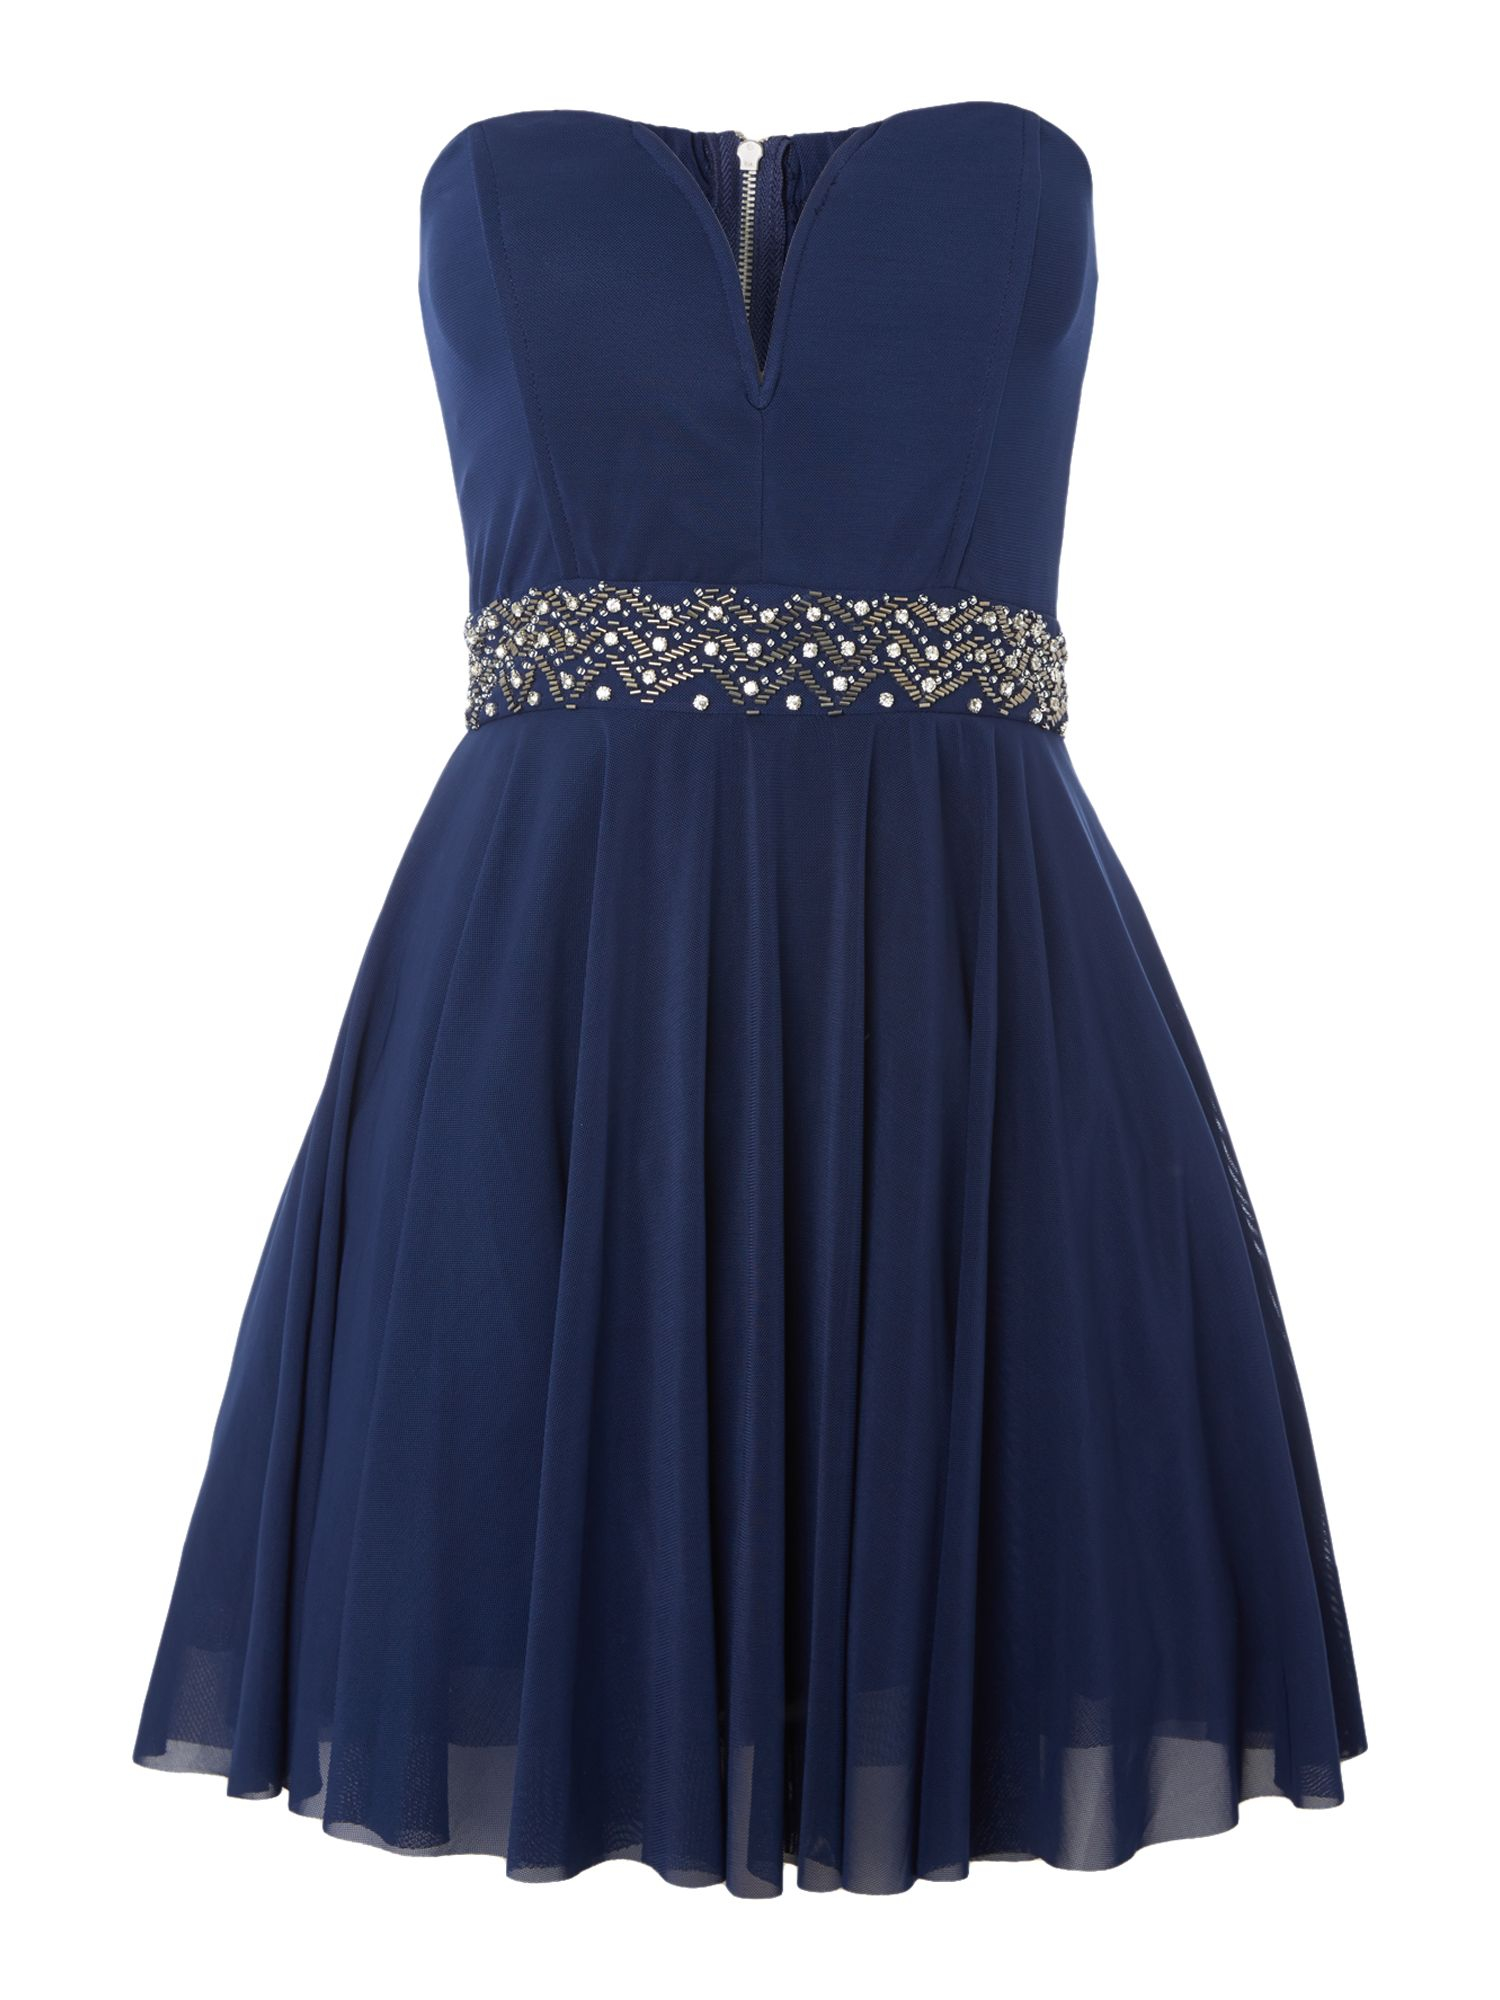 Tfnc Strapless Embellished Waist Fit and Flare Dress in Blue | Lyst